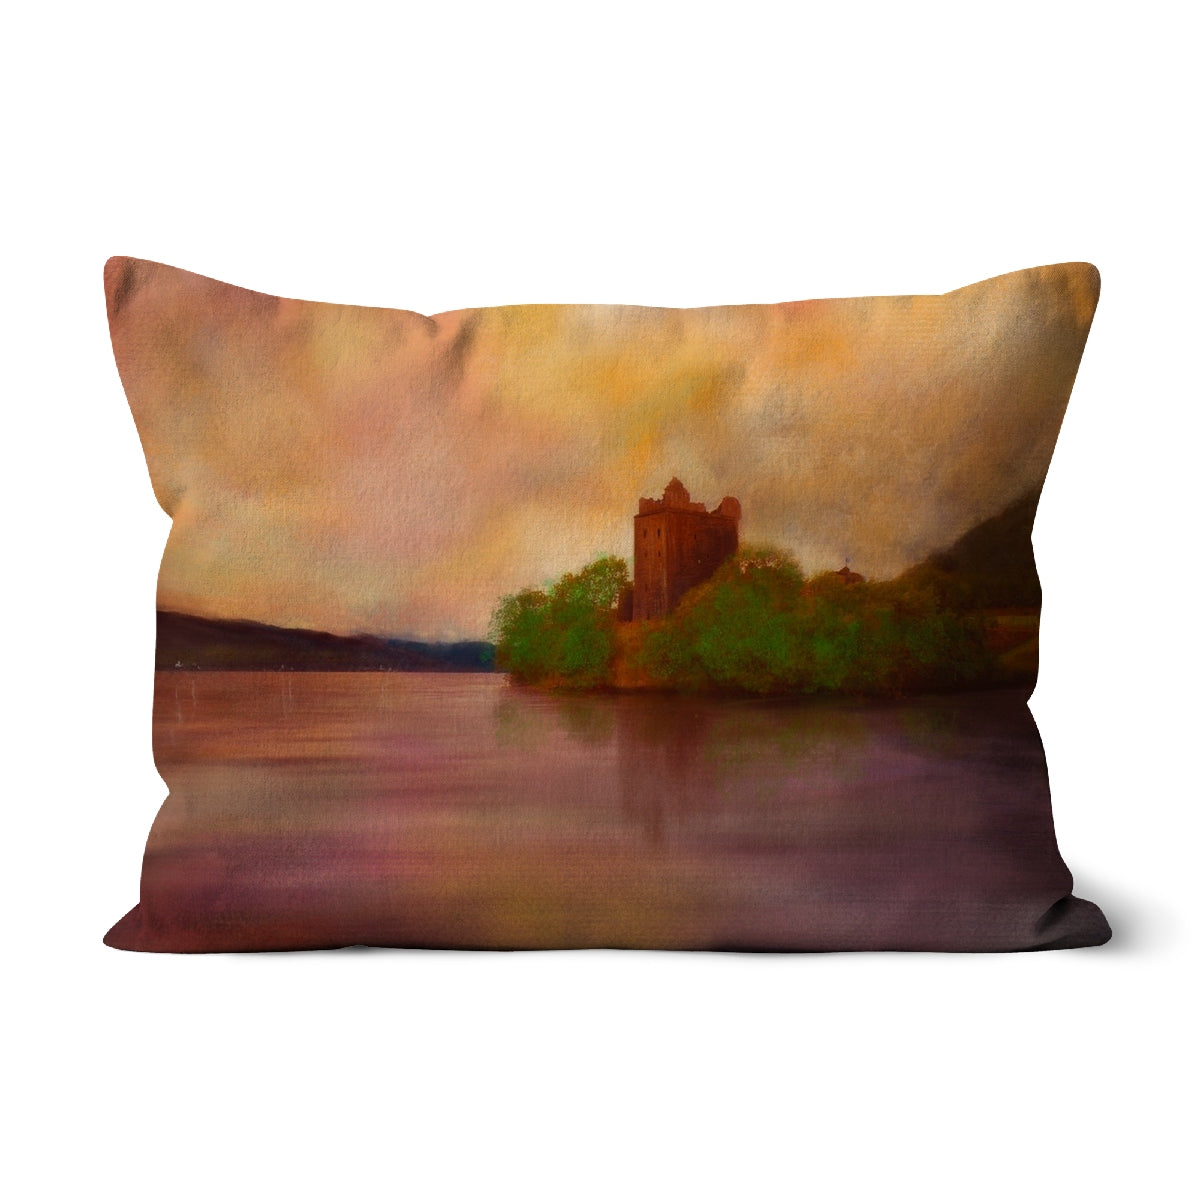 Urquhart Castle Art Gifts Cushion-Cushions-Historic & Iconic Scotland Art Gallery-Linen-19"x13"-Paintings, Prints, Homeware, Art Gifts From Scotland By Scottish Artist Kevin Hunter